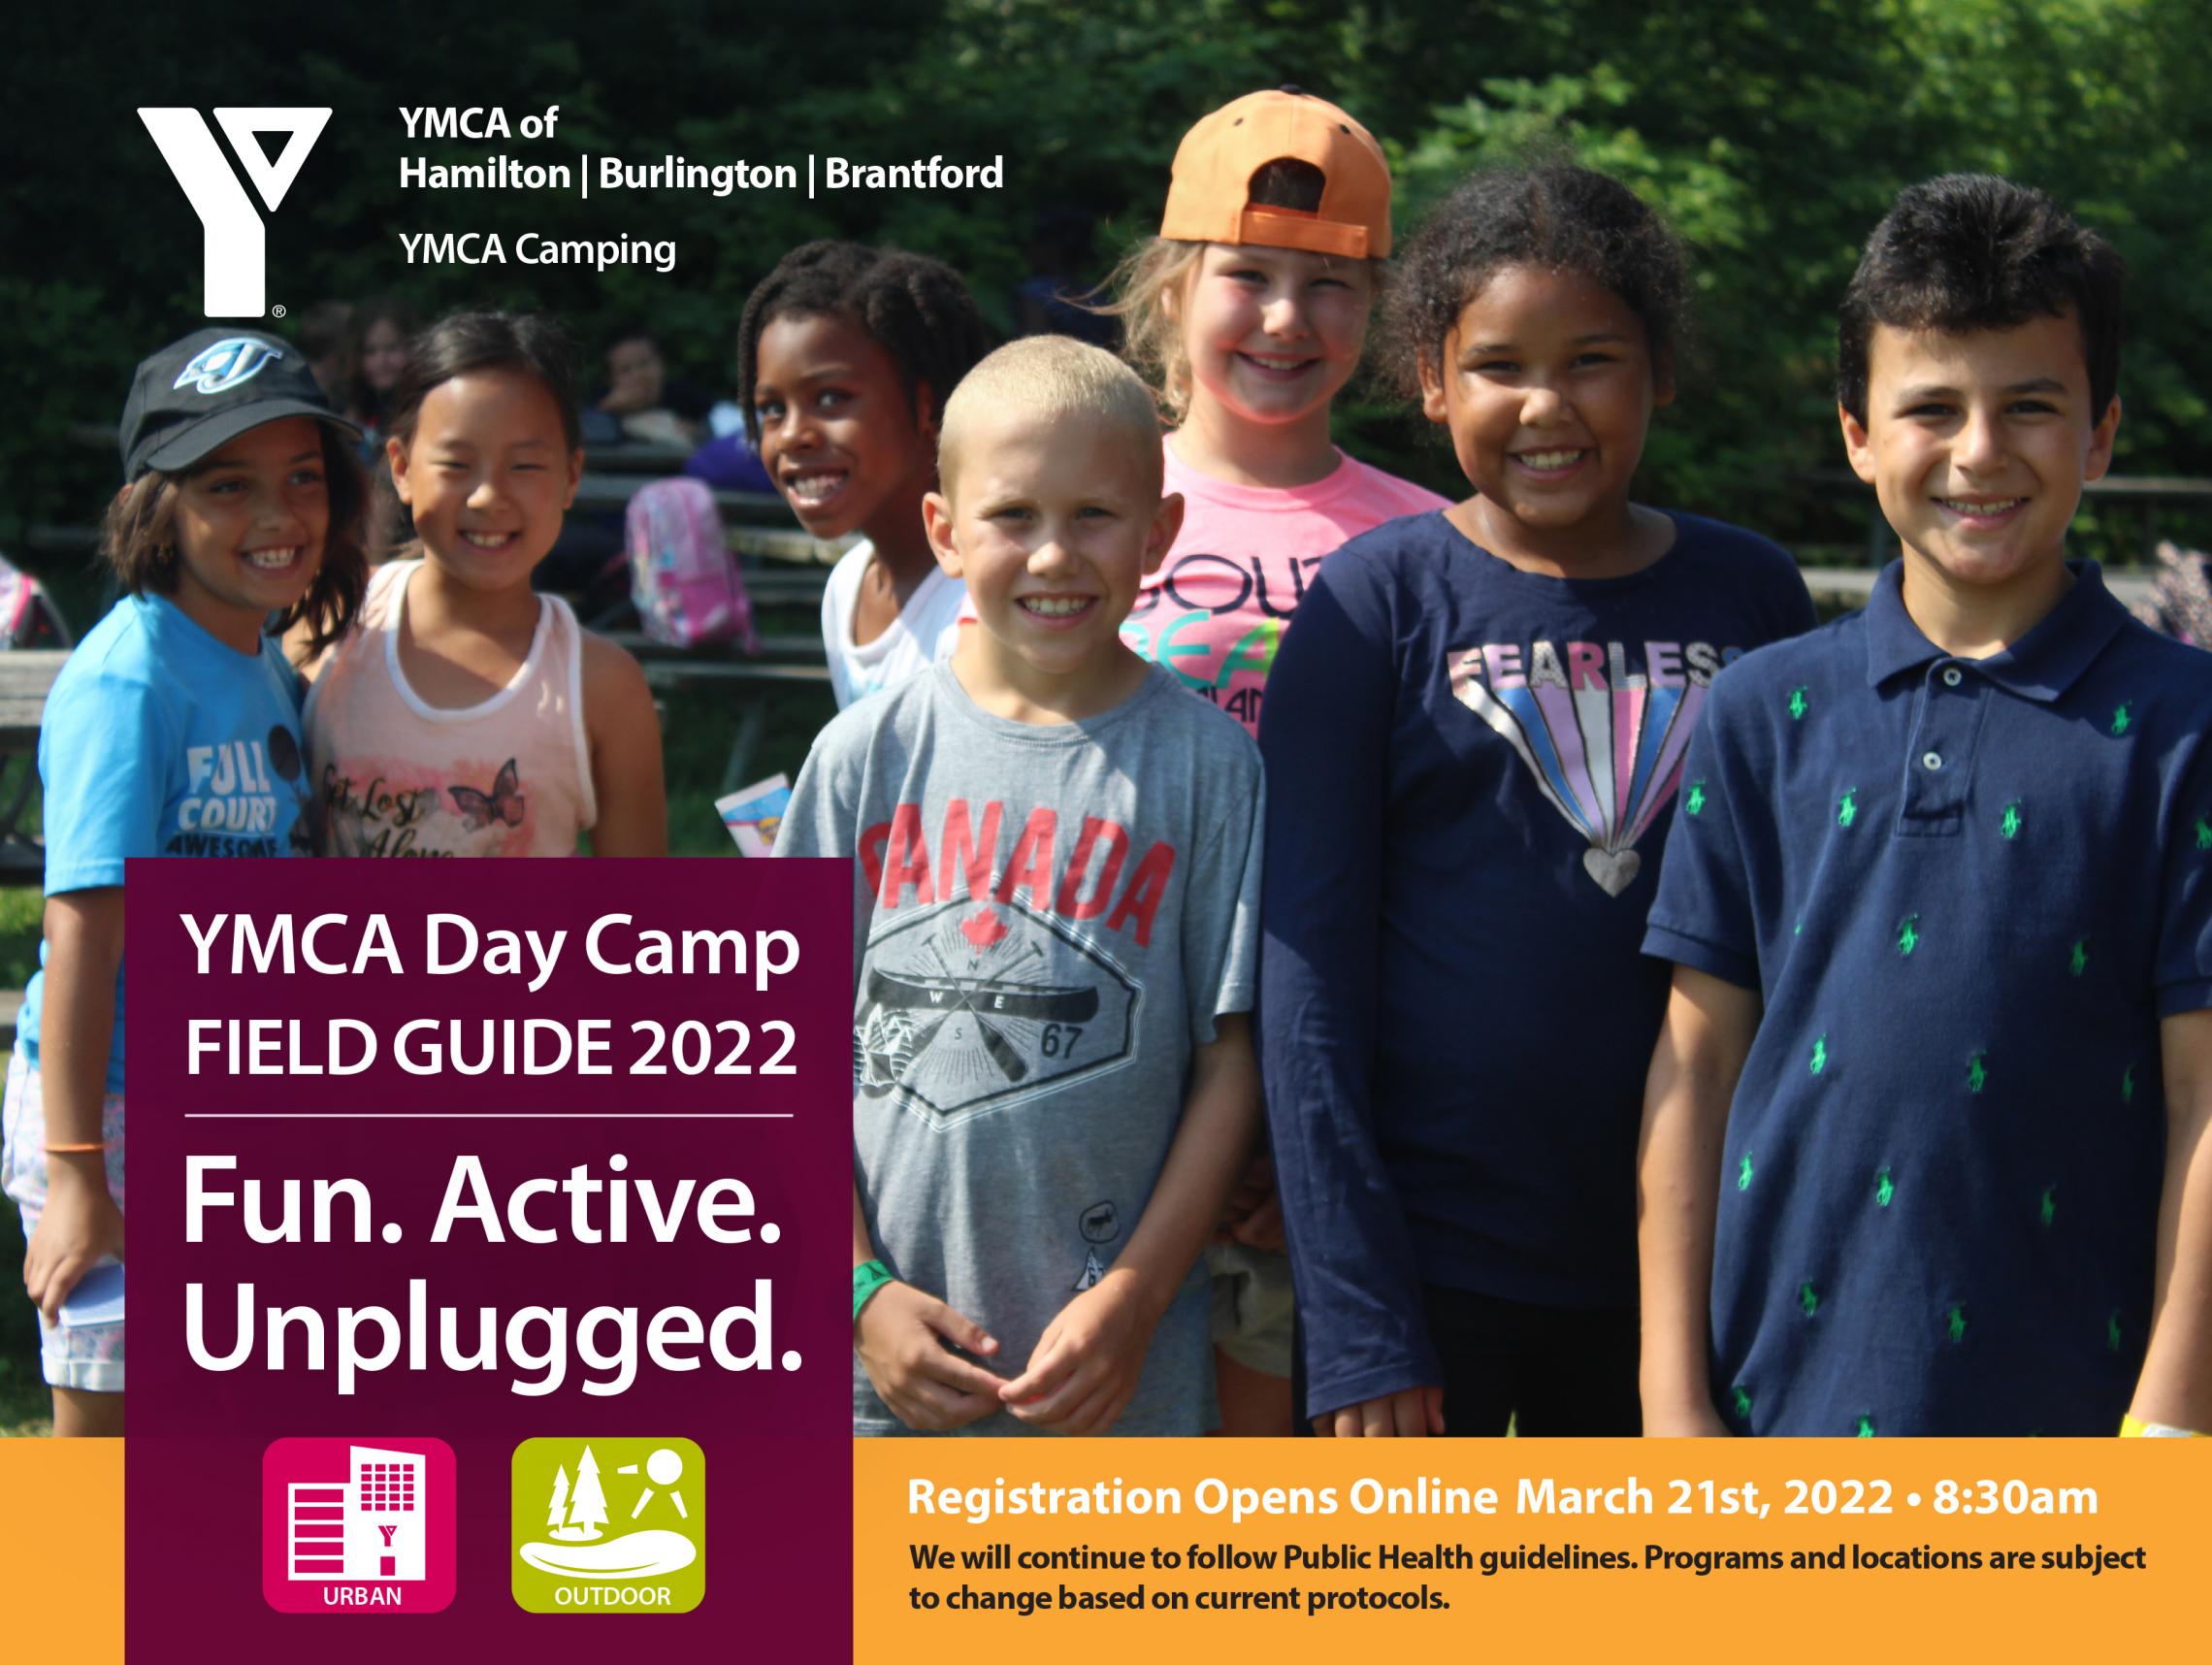 YMCA Day Camp Field Guide 2022 - There is an image of seven children - five girls and two boys, smiling towards the camera. The bottom texts reads "Registration opens online March 21st, 2022 at 8:30pm.  We will continue to follow Public Health guidelines. Programs and locations are subject to change based on current protocols." 